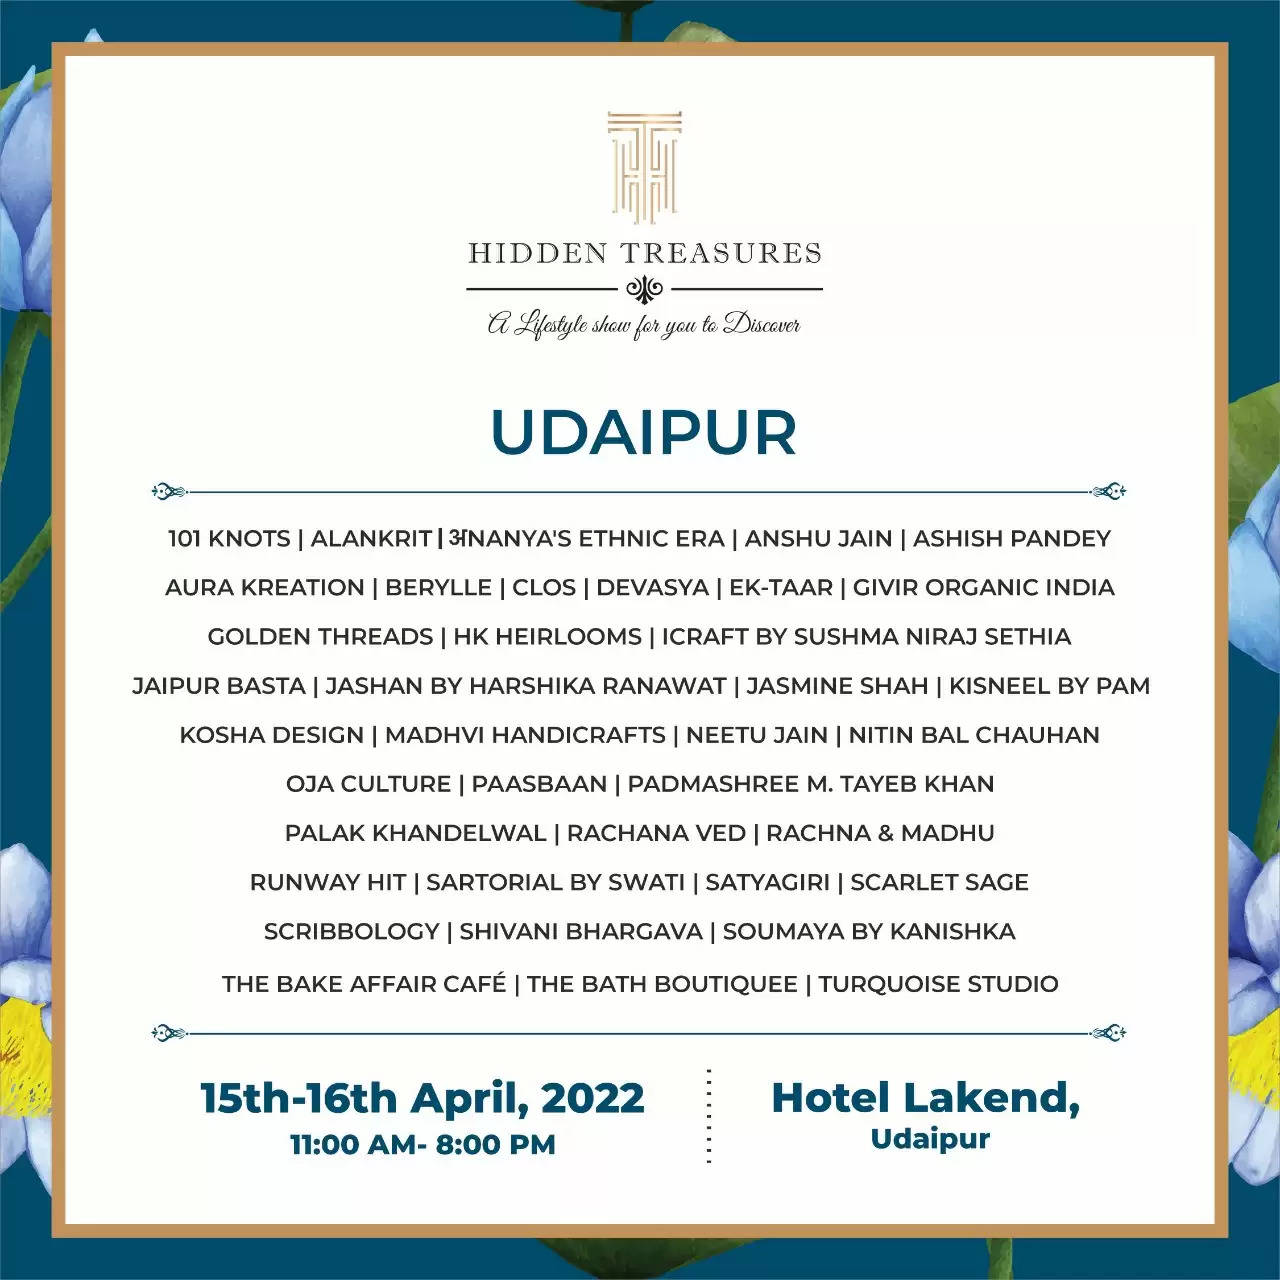 Hidden Treasures Event at Udaipur Hotel Lakend fashion clothing accessories, swati, 